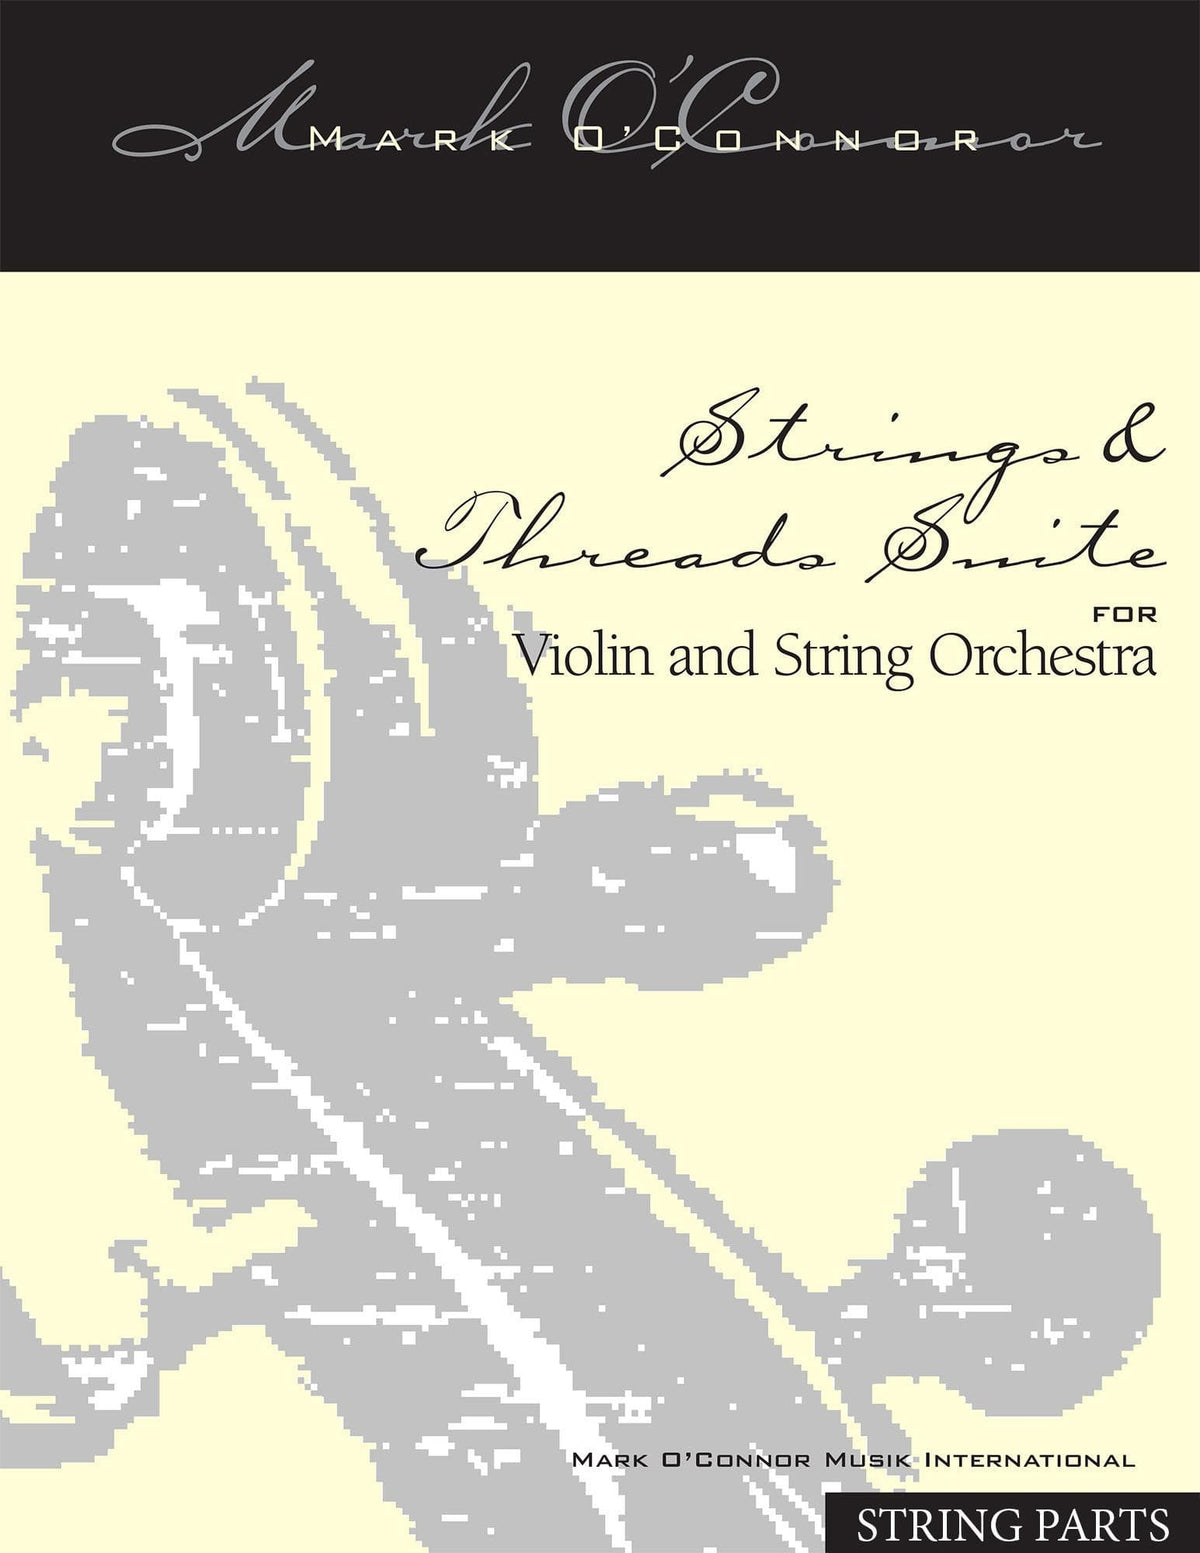 O'Connor, Mark - Strings & Threads Suite for Violin and String Orchestra - String Parts - Digital Download